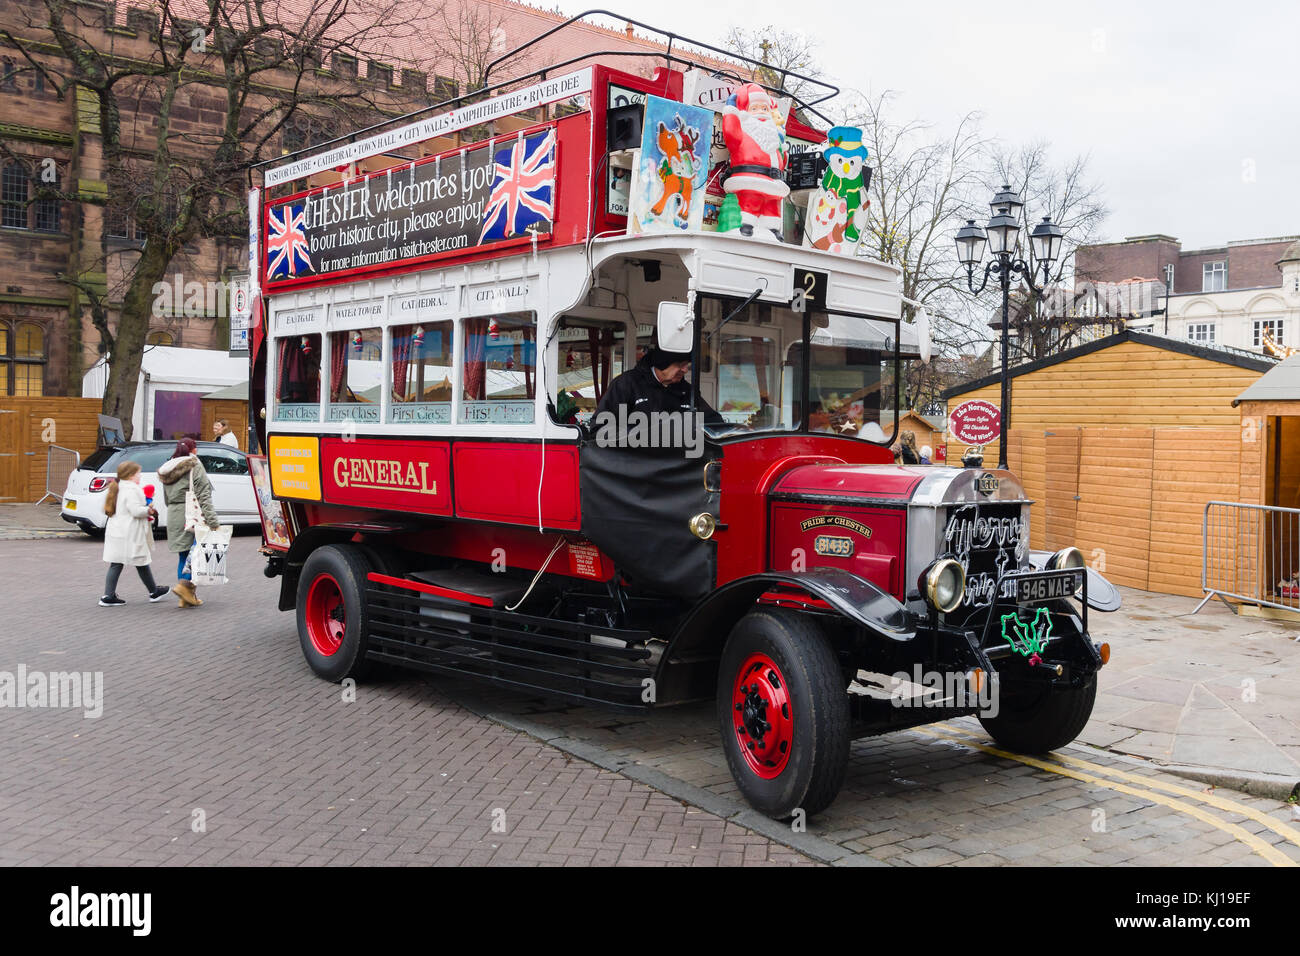 Vintage open top tourist bus decorated with Christmas decorations in the historic city of Chester Stock Photo